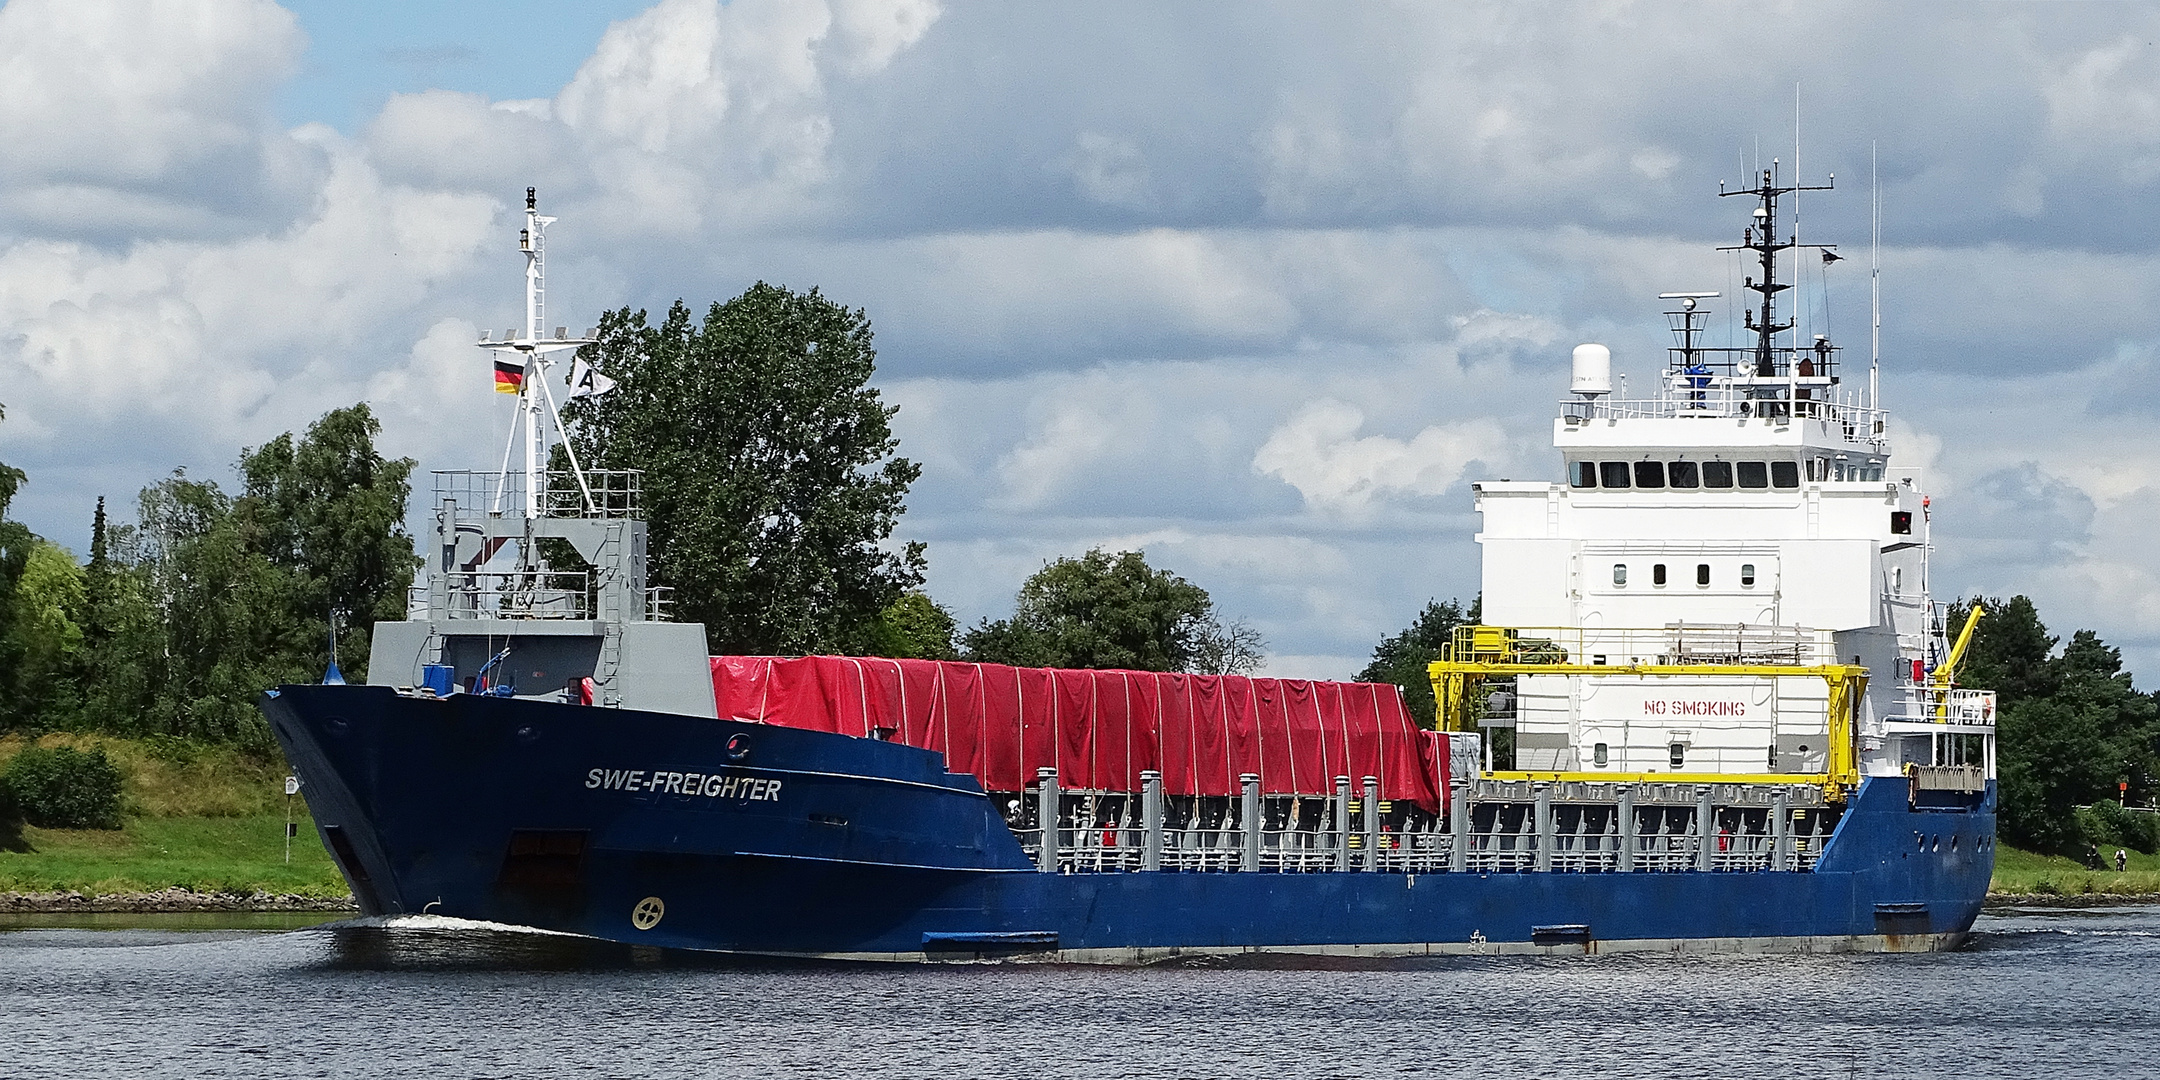 SWE_FREIGHTER 